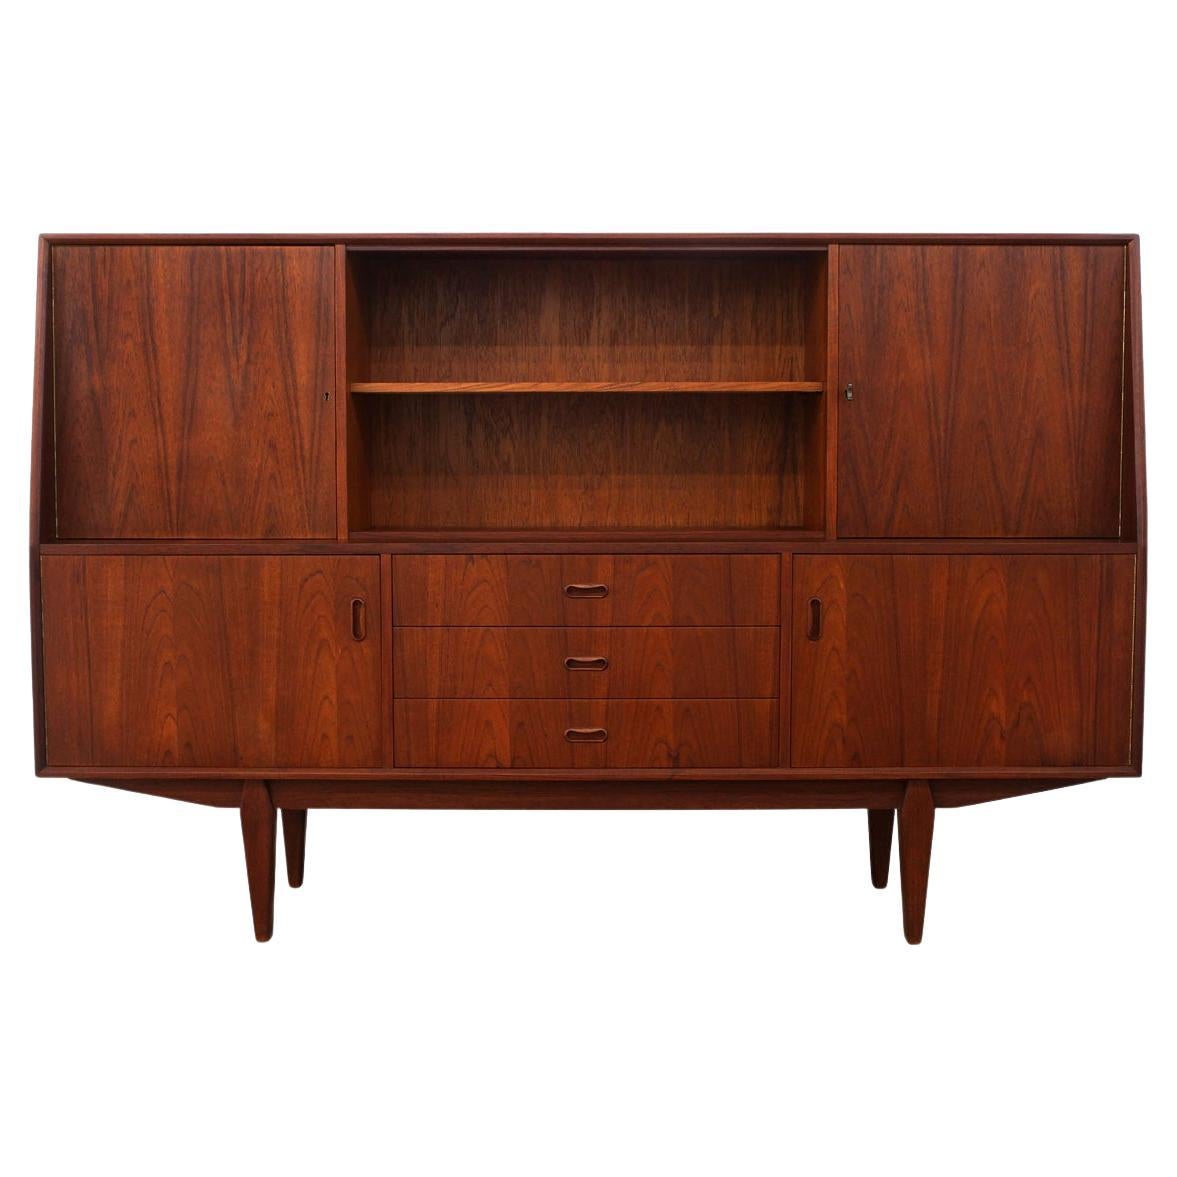 Vintage Teak Credenza with Locking Cabinets and Bar Section